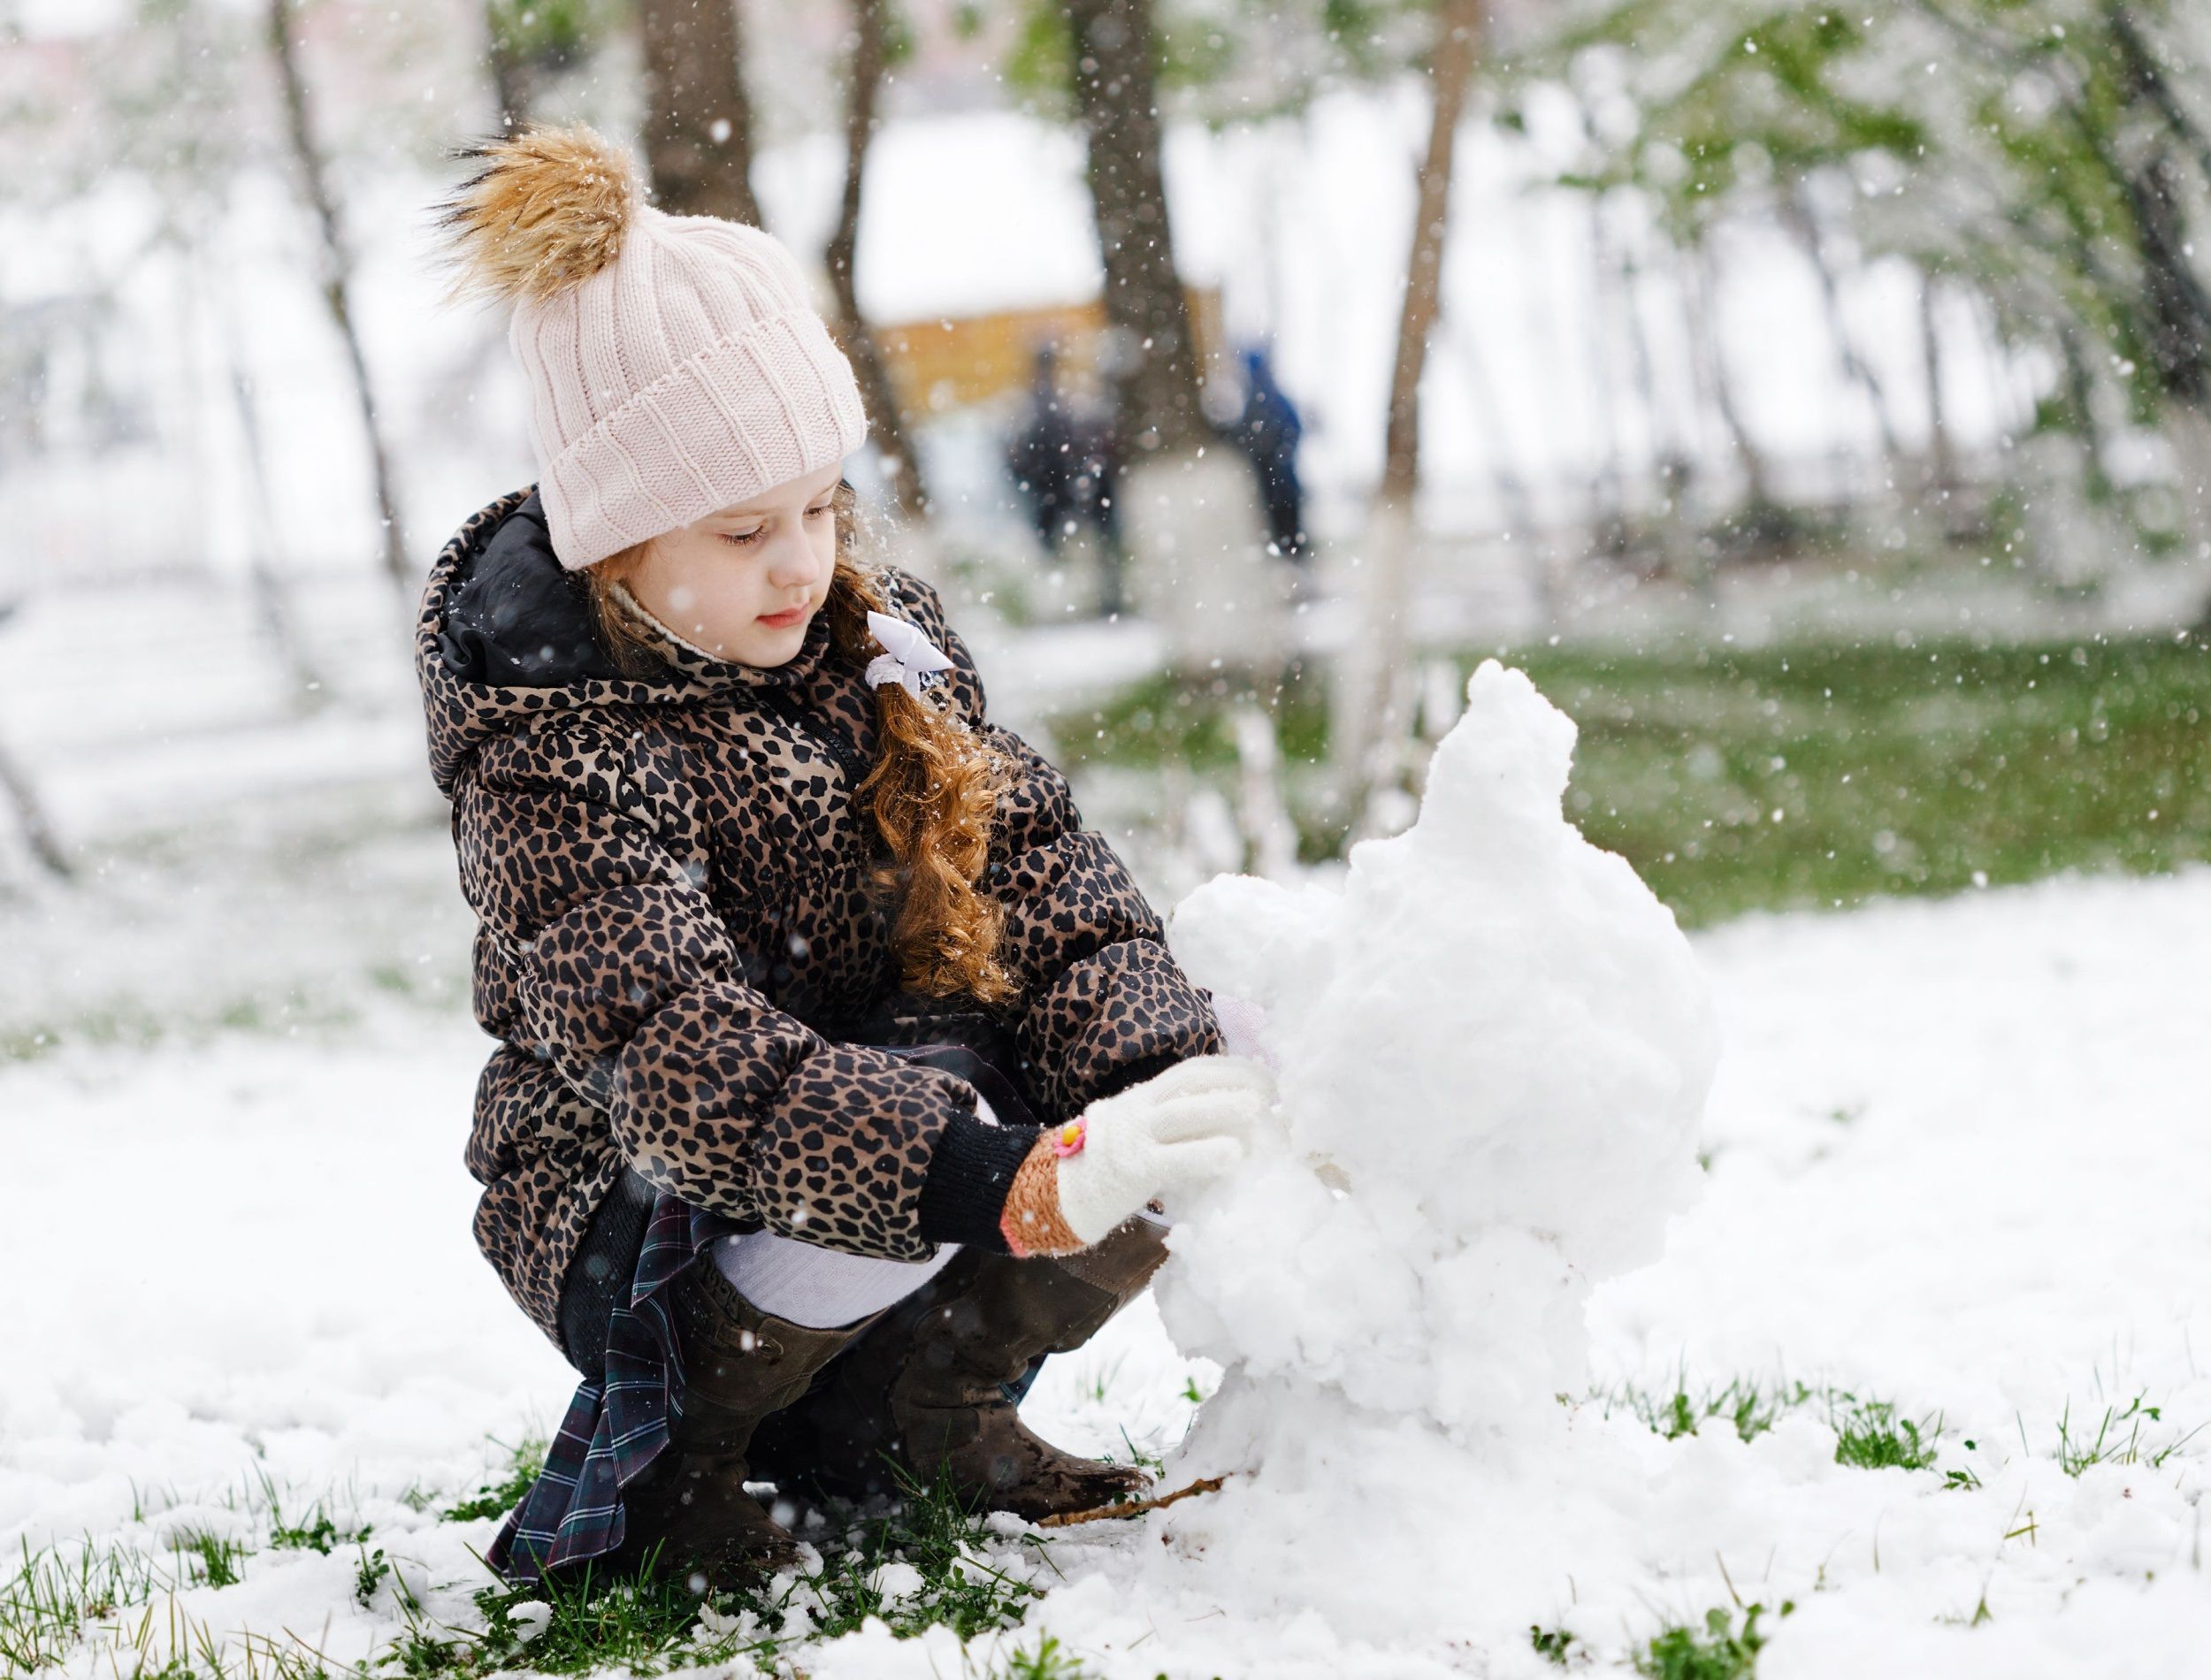 Little girl making snowman on snowy spring day.